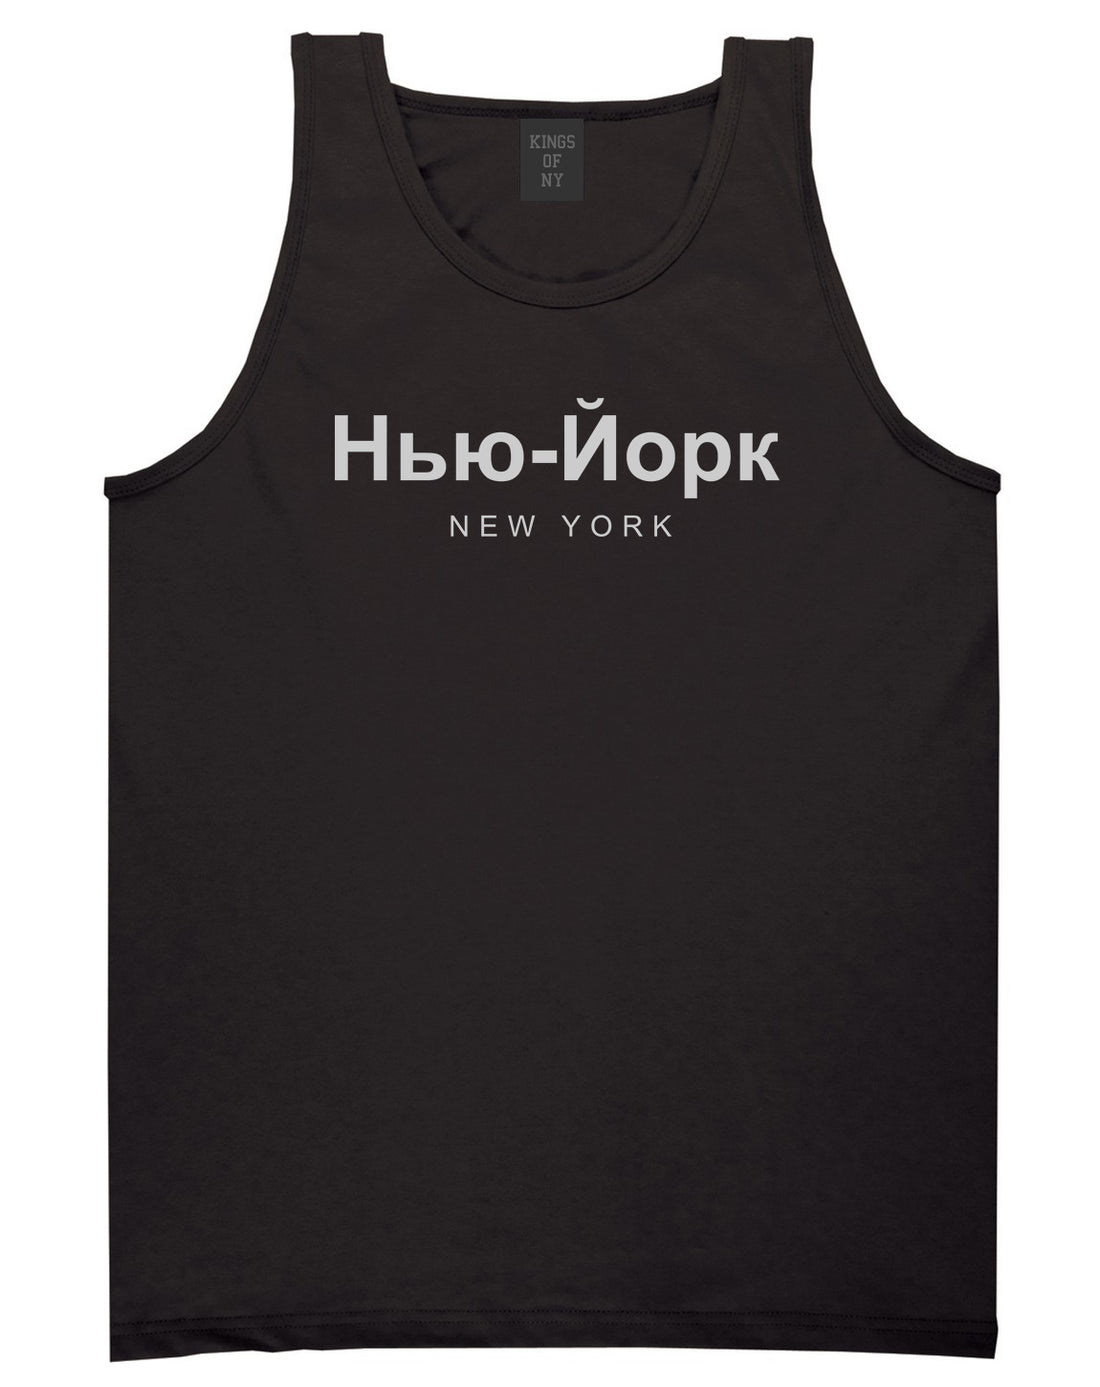 New York In Russian Mens Tank Top Shirt Black by Kings Of NY